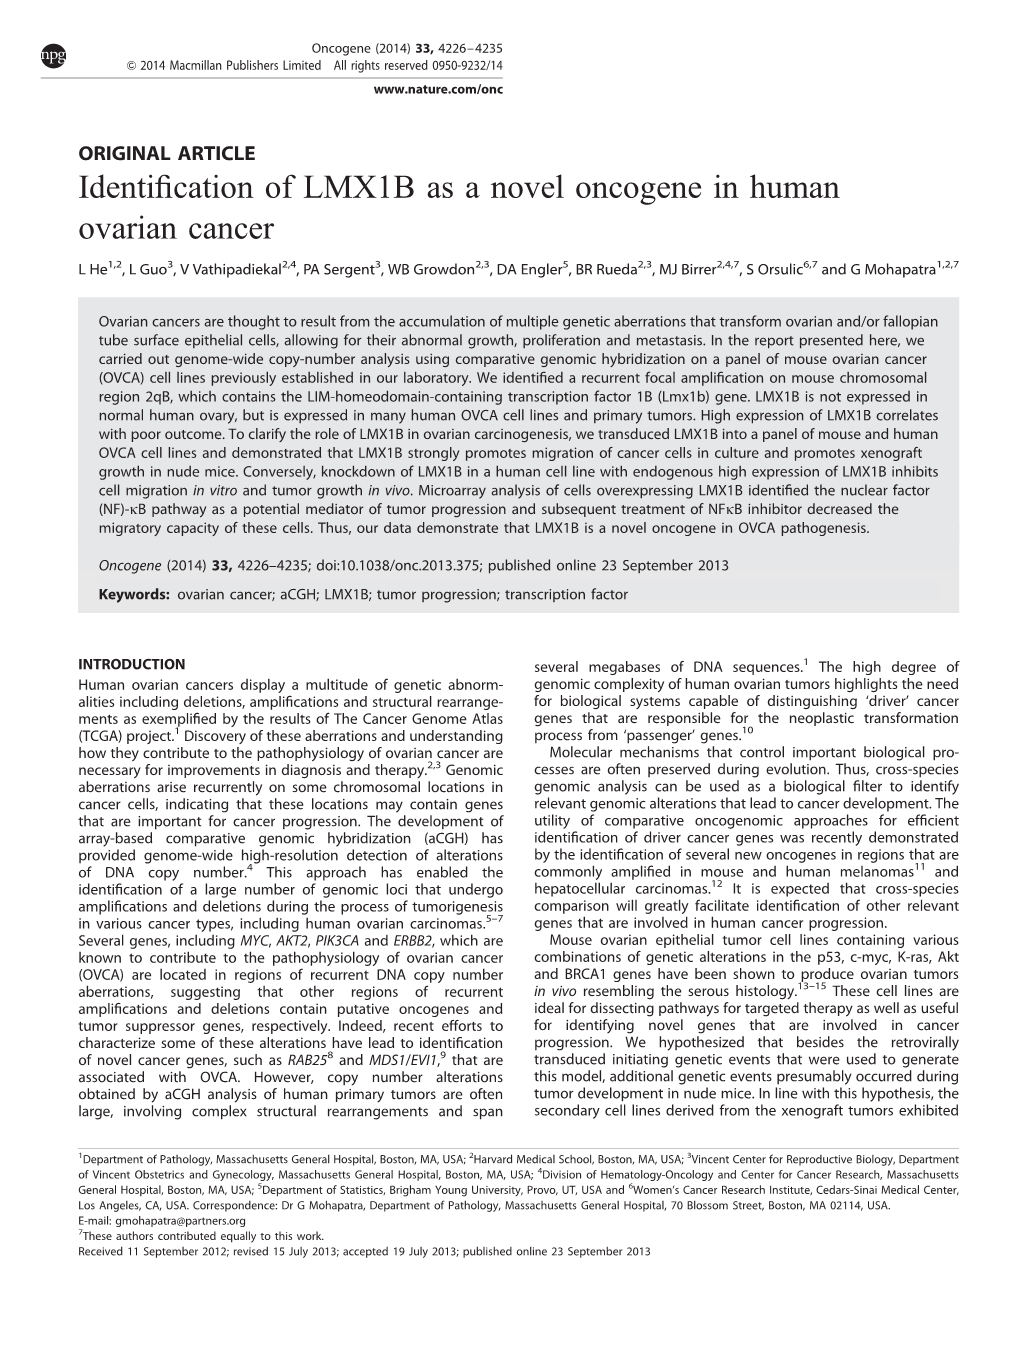 Identification of LMX1B As a Novel Oncogene in Human Ovarian Cancer